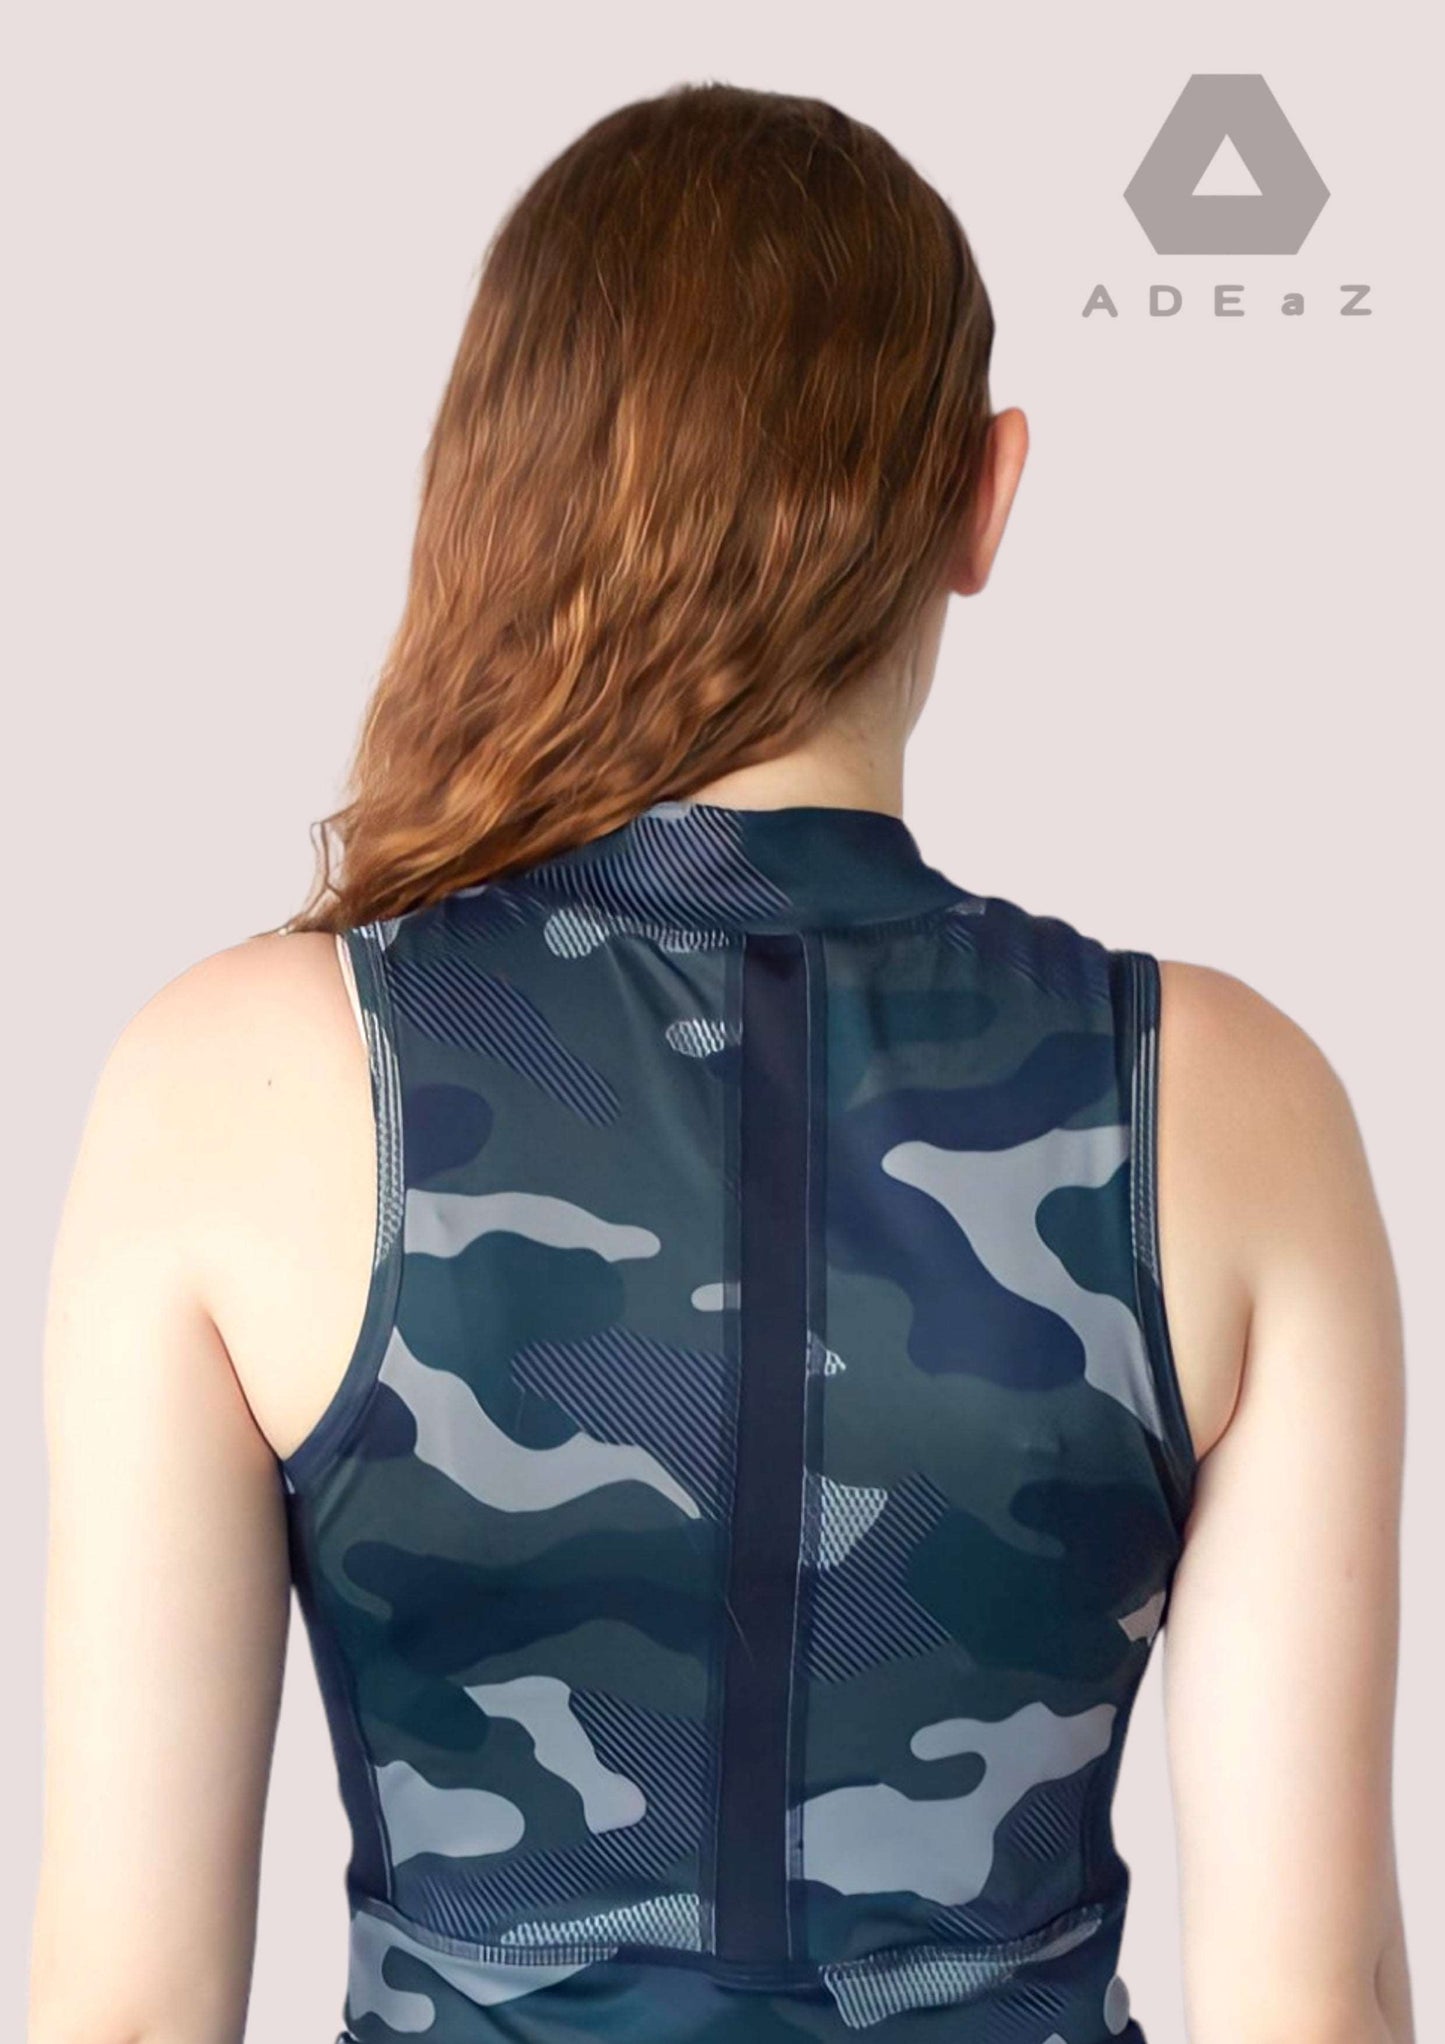 Women's Camo Zip-Up Sleeveless Crop Top: Trendy camouflage pattern with front zipper, sleeveless design, and crop length